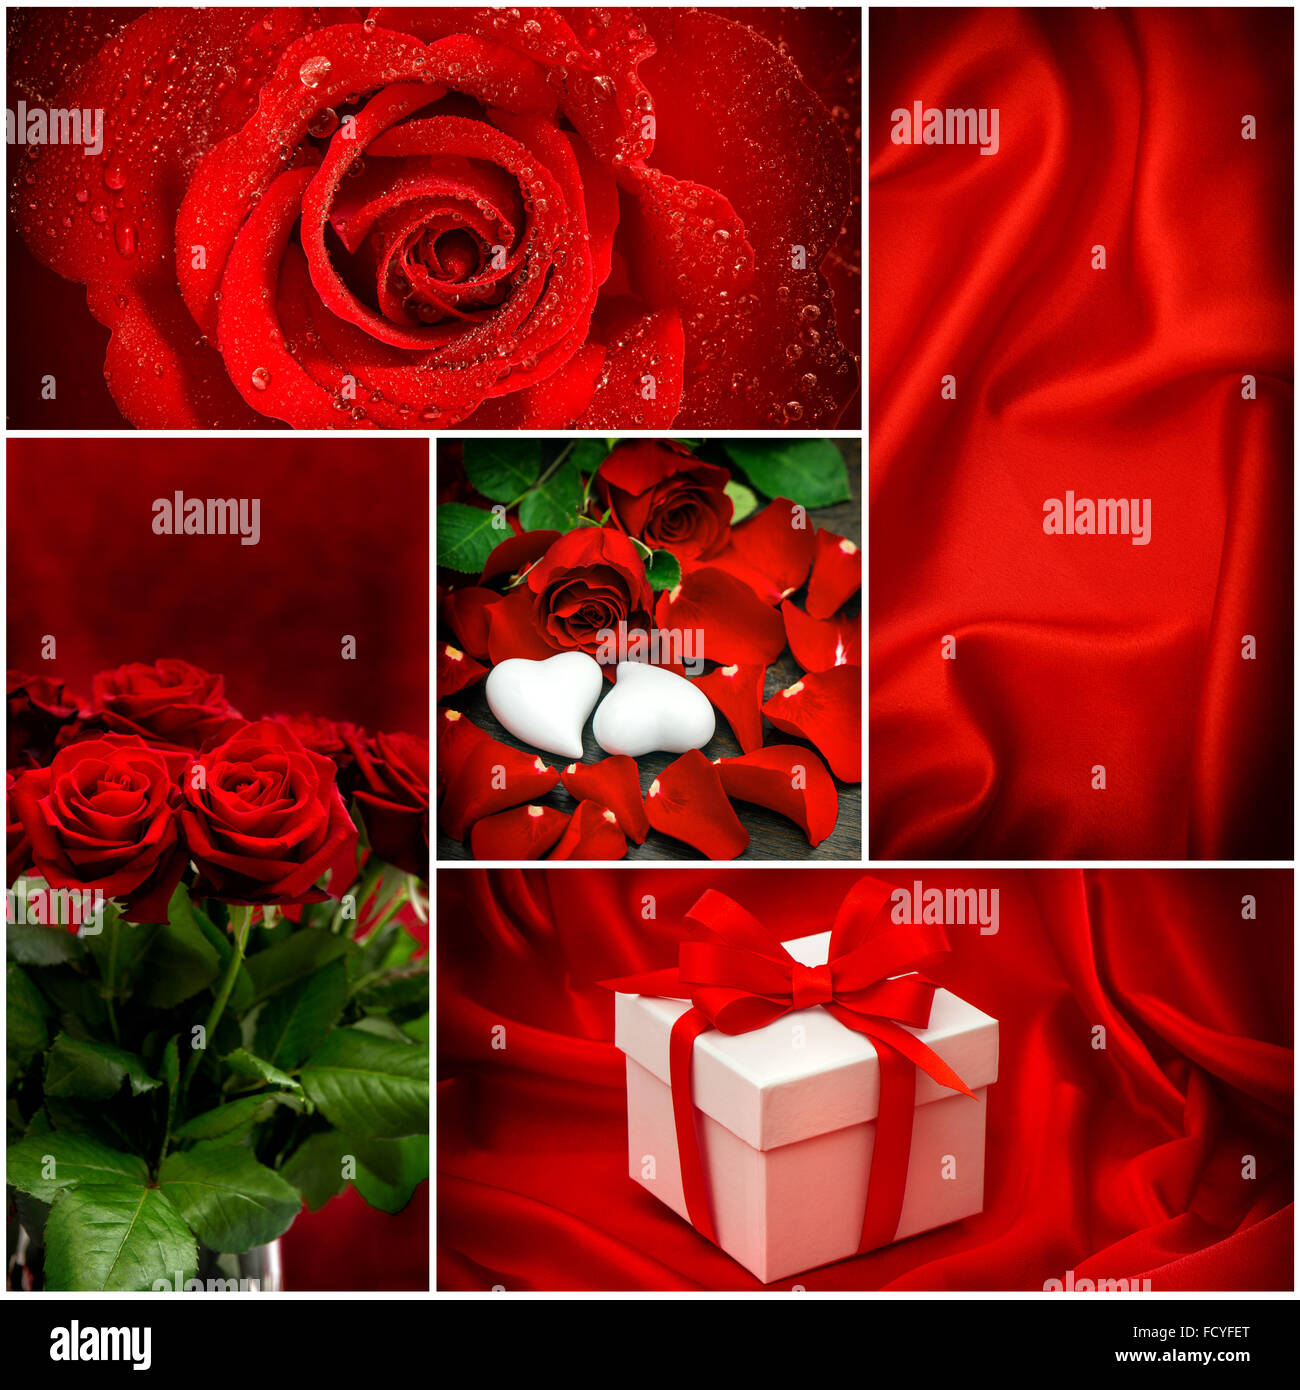 Red roses. Hearts. Gift box. Valentines Day concept Stock Photo